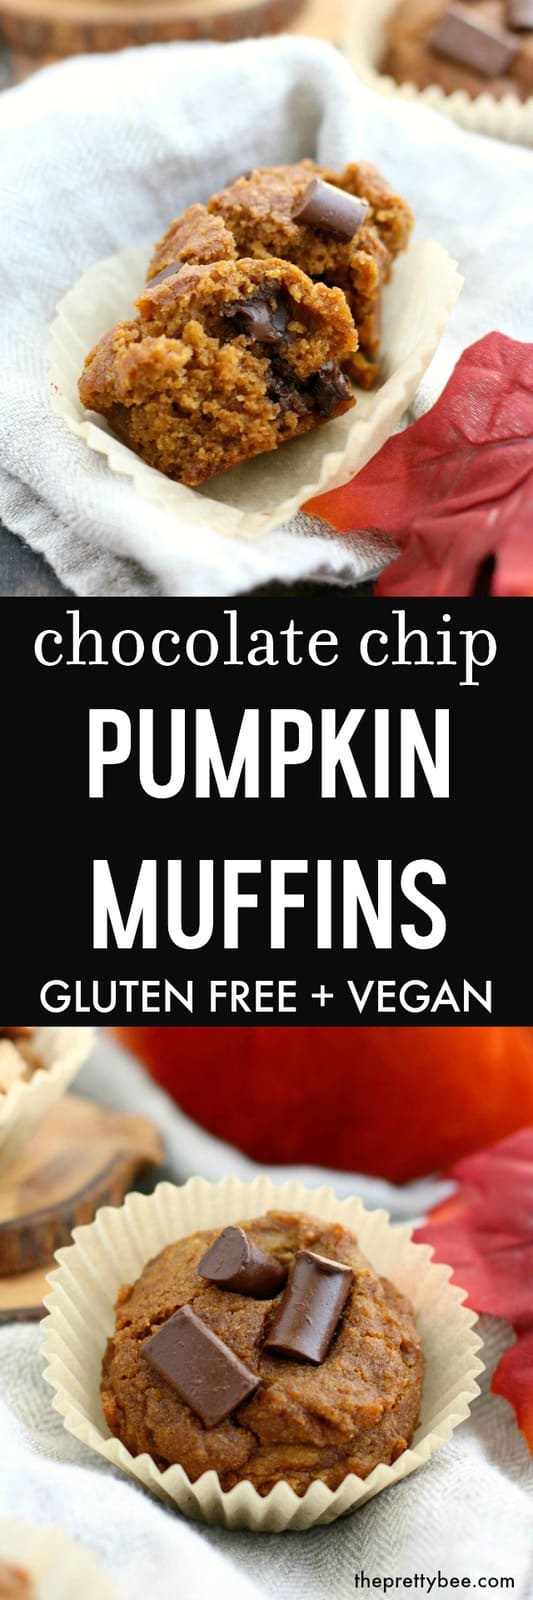 The best gluten free and vegan chocolate chip pumpkin muffins! My family LOVES these. 